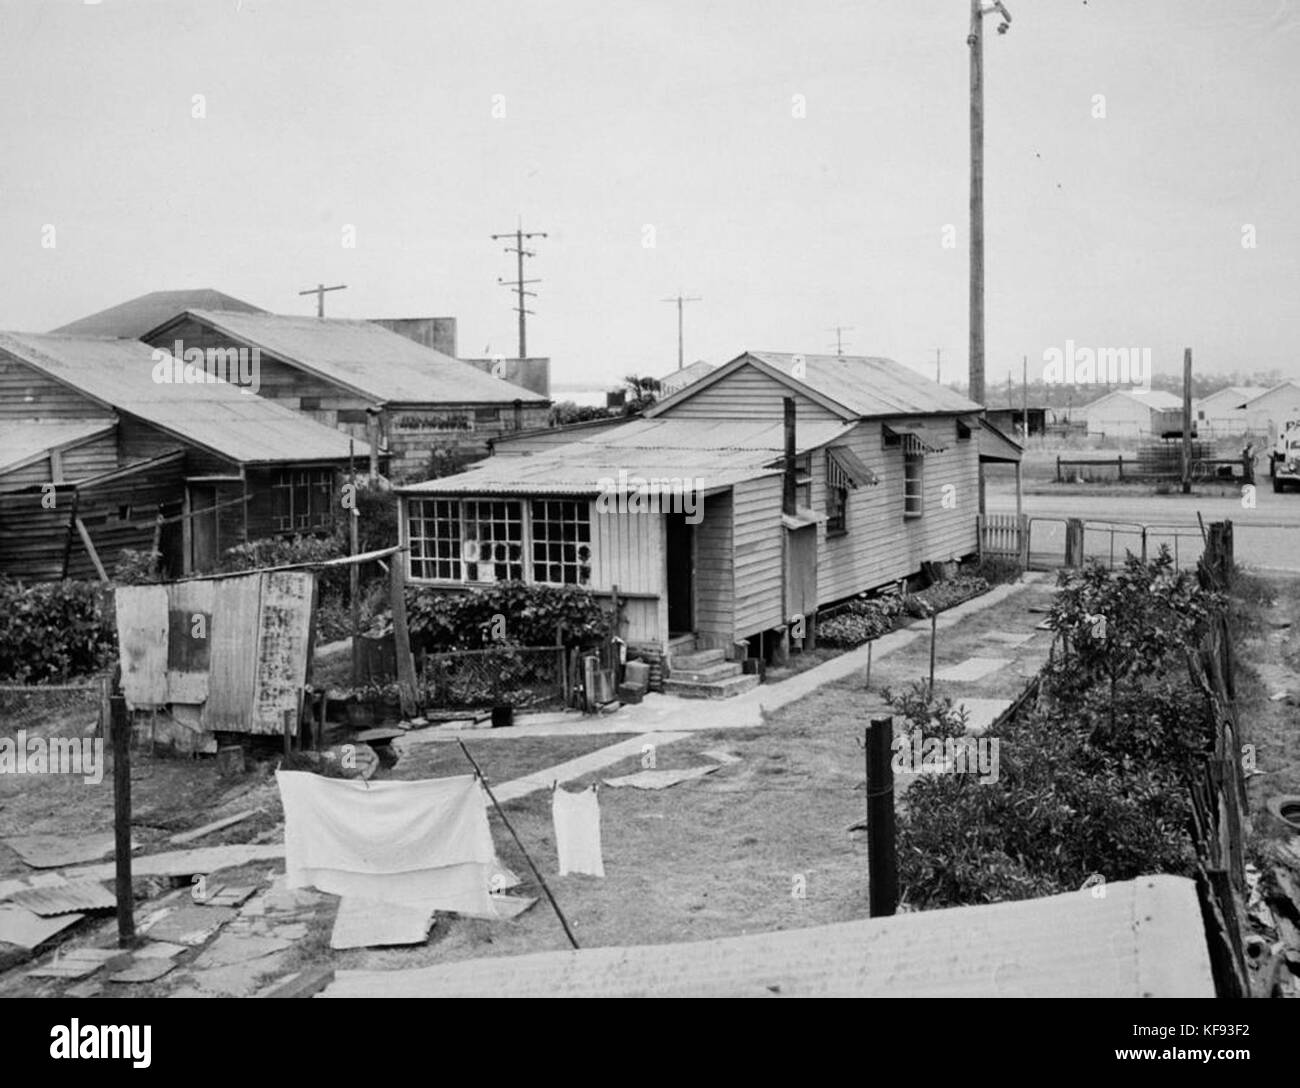 1 123880 View of a part of the suburb of Rocklea in the 1950s Stock Photo